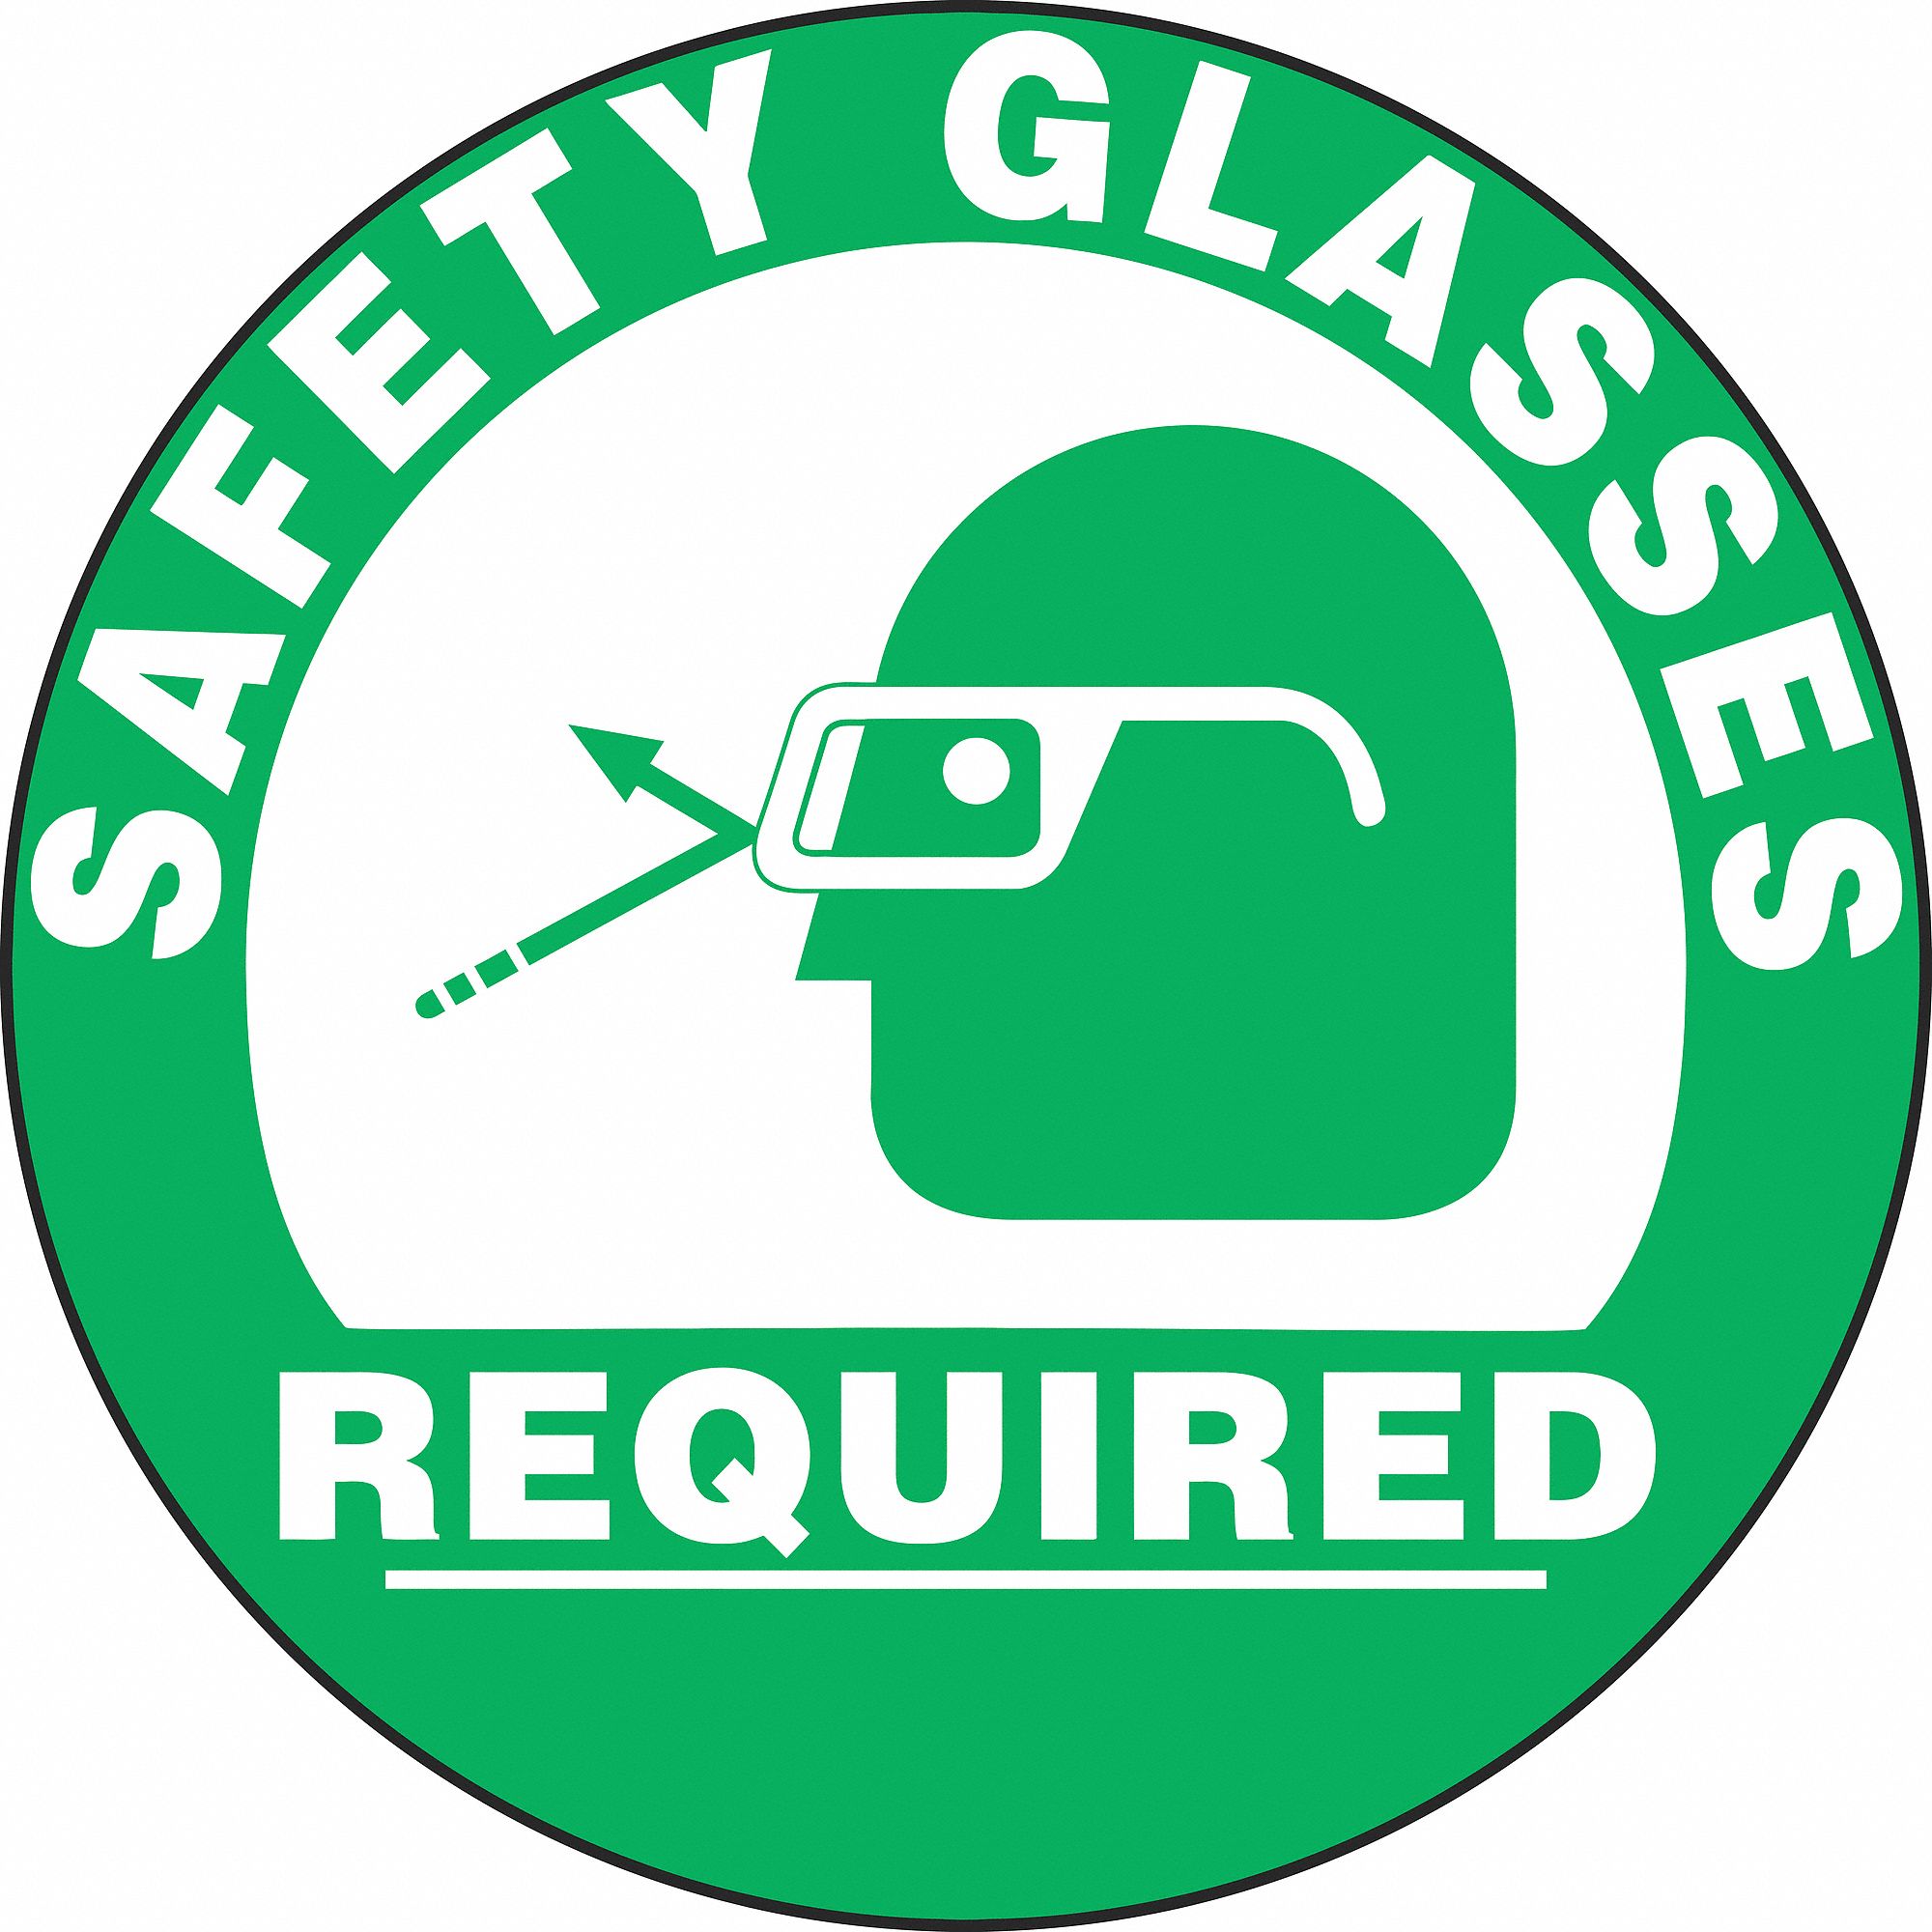 Floor Sign,Safety Glasses,17 In. Dia.